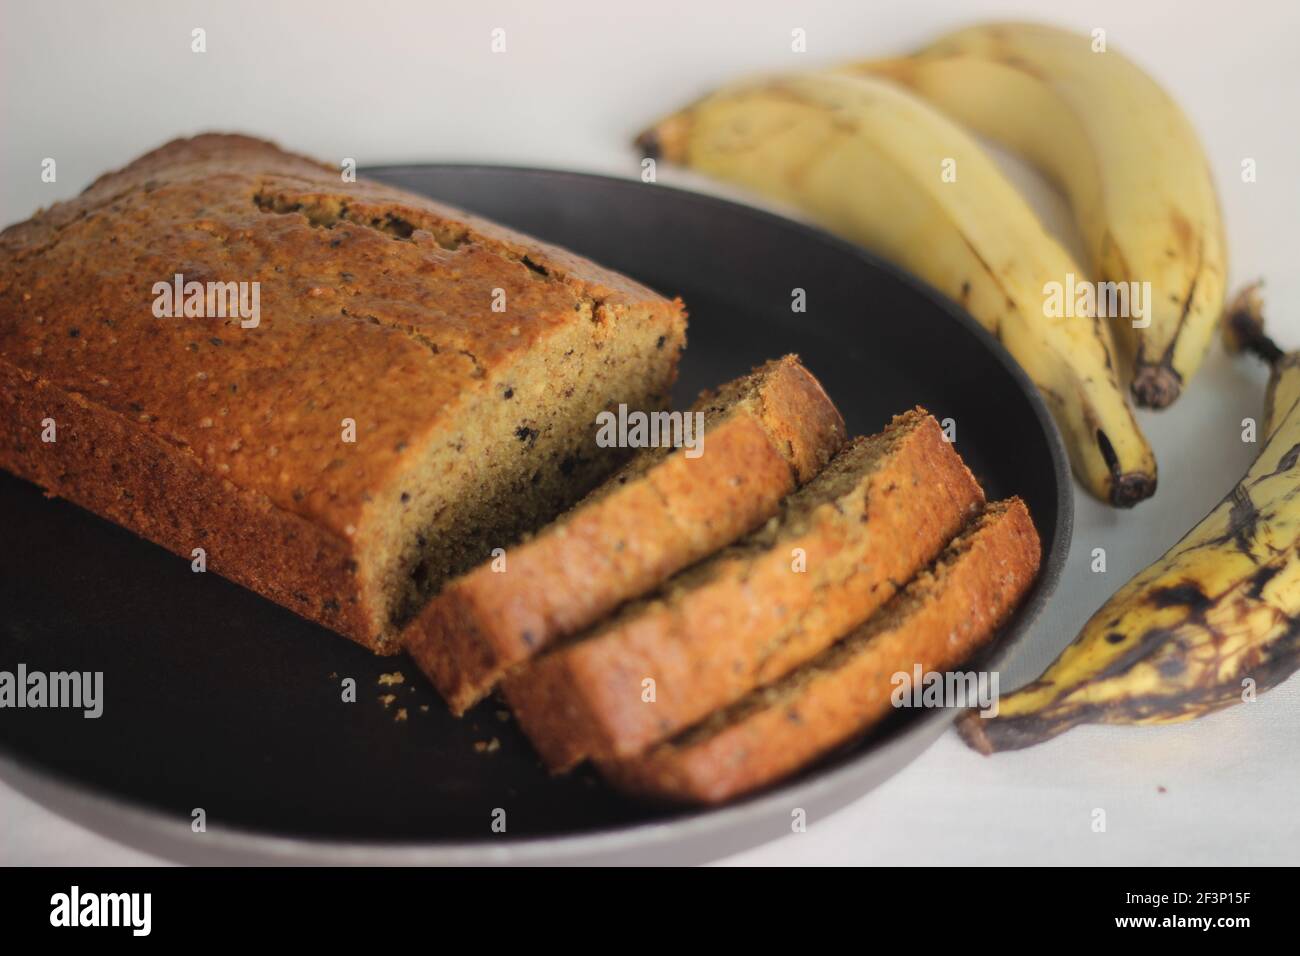 Slices of home baked whole wheat ripe plantain cake. It is also called ripe plantain bread. Shot on a white background Stock Photo